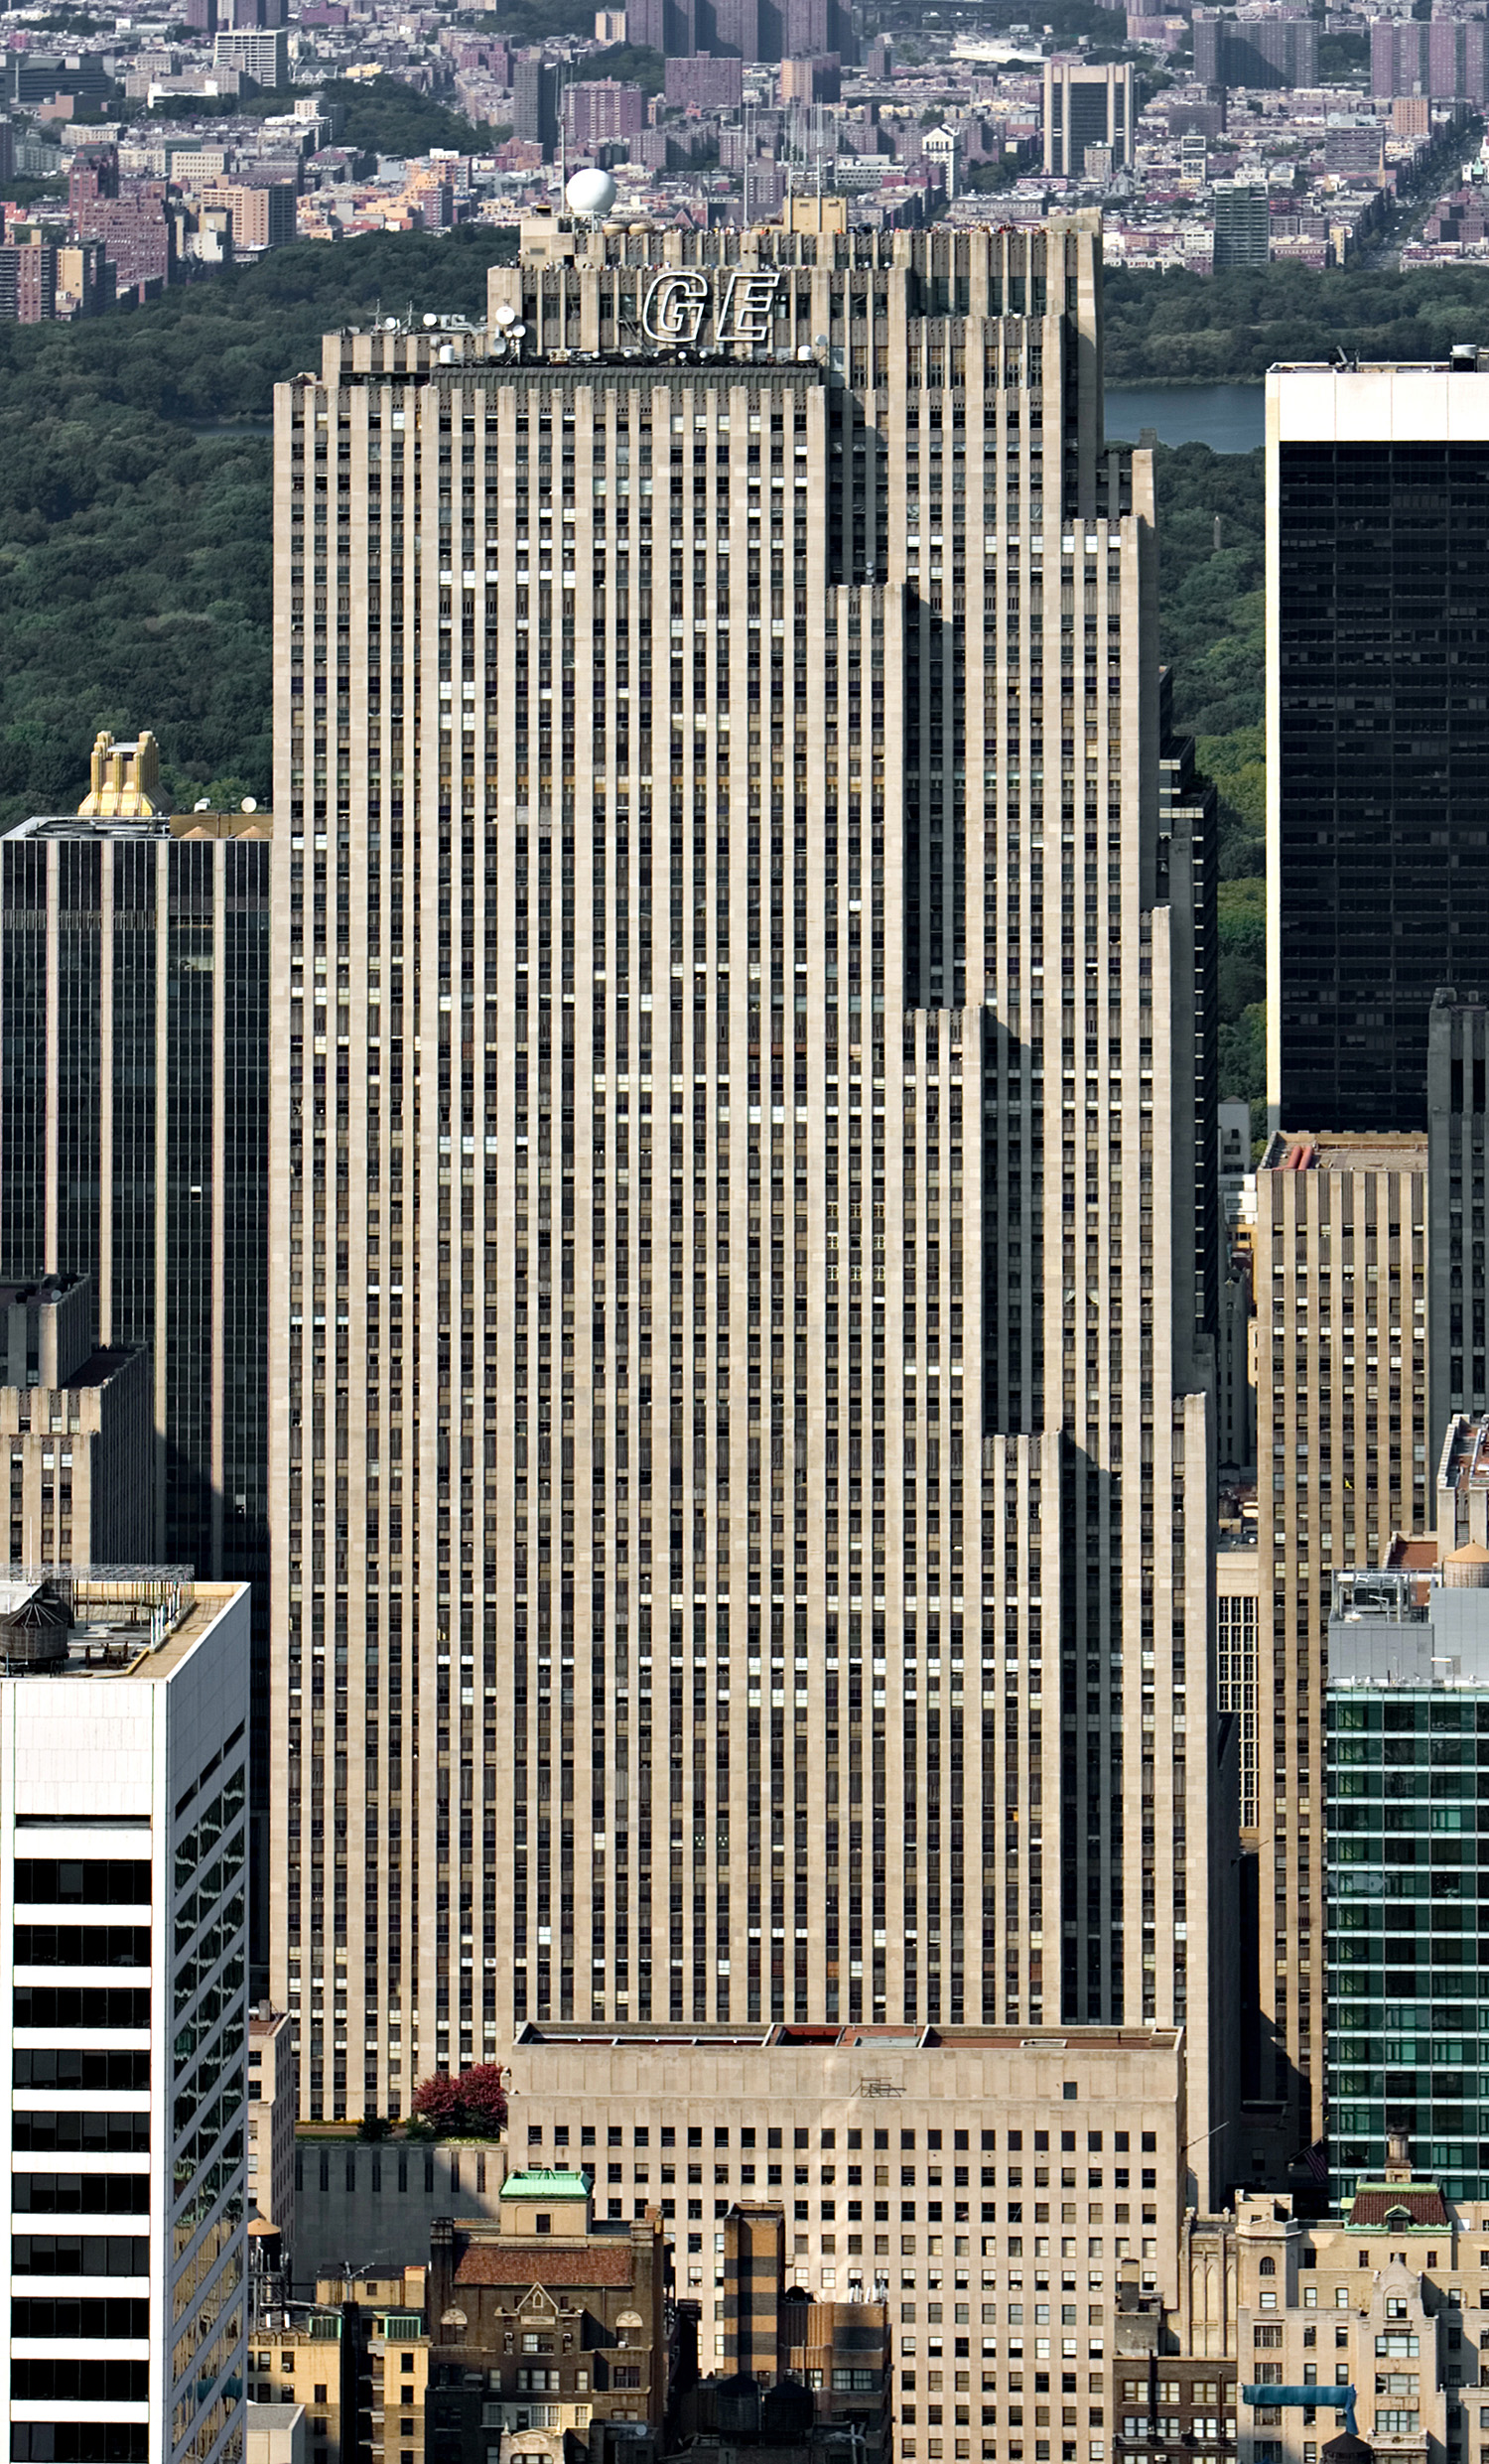 GE Building, New York City - View from Empire State Building. © Mathias Beinling